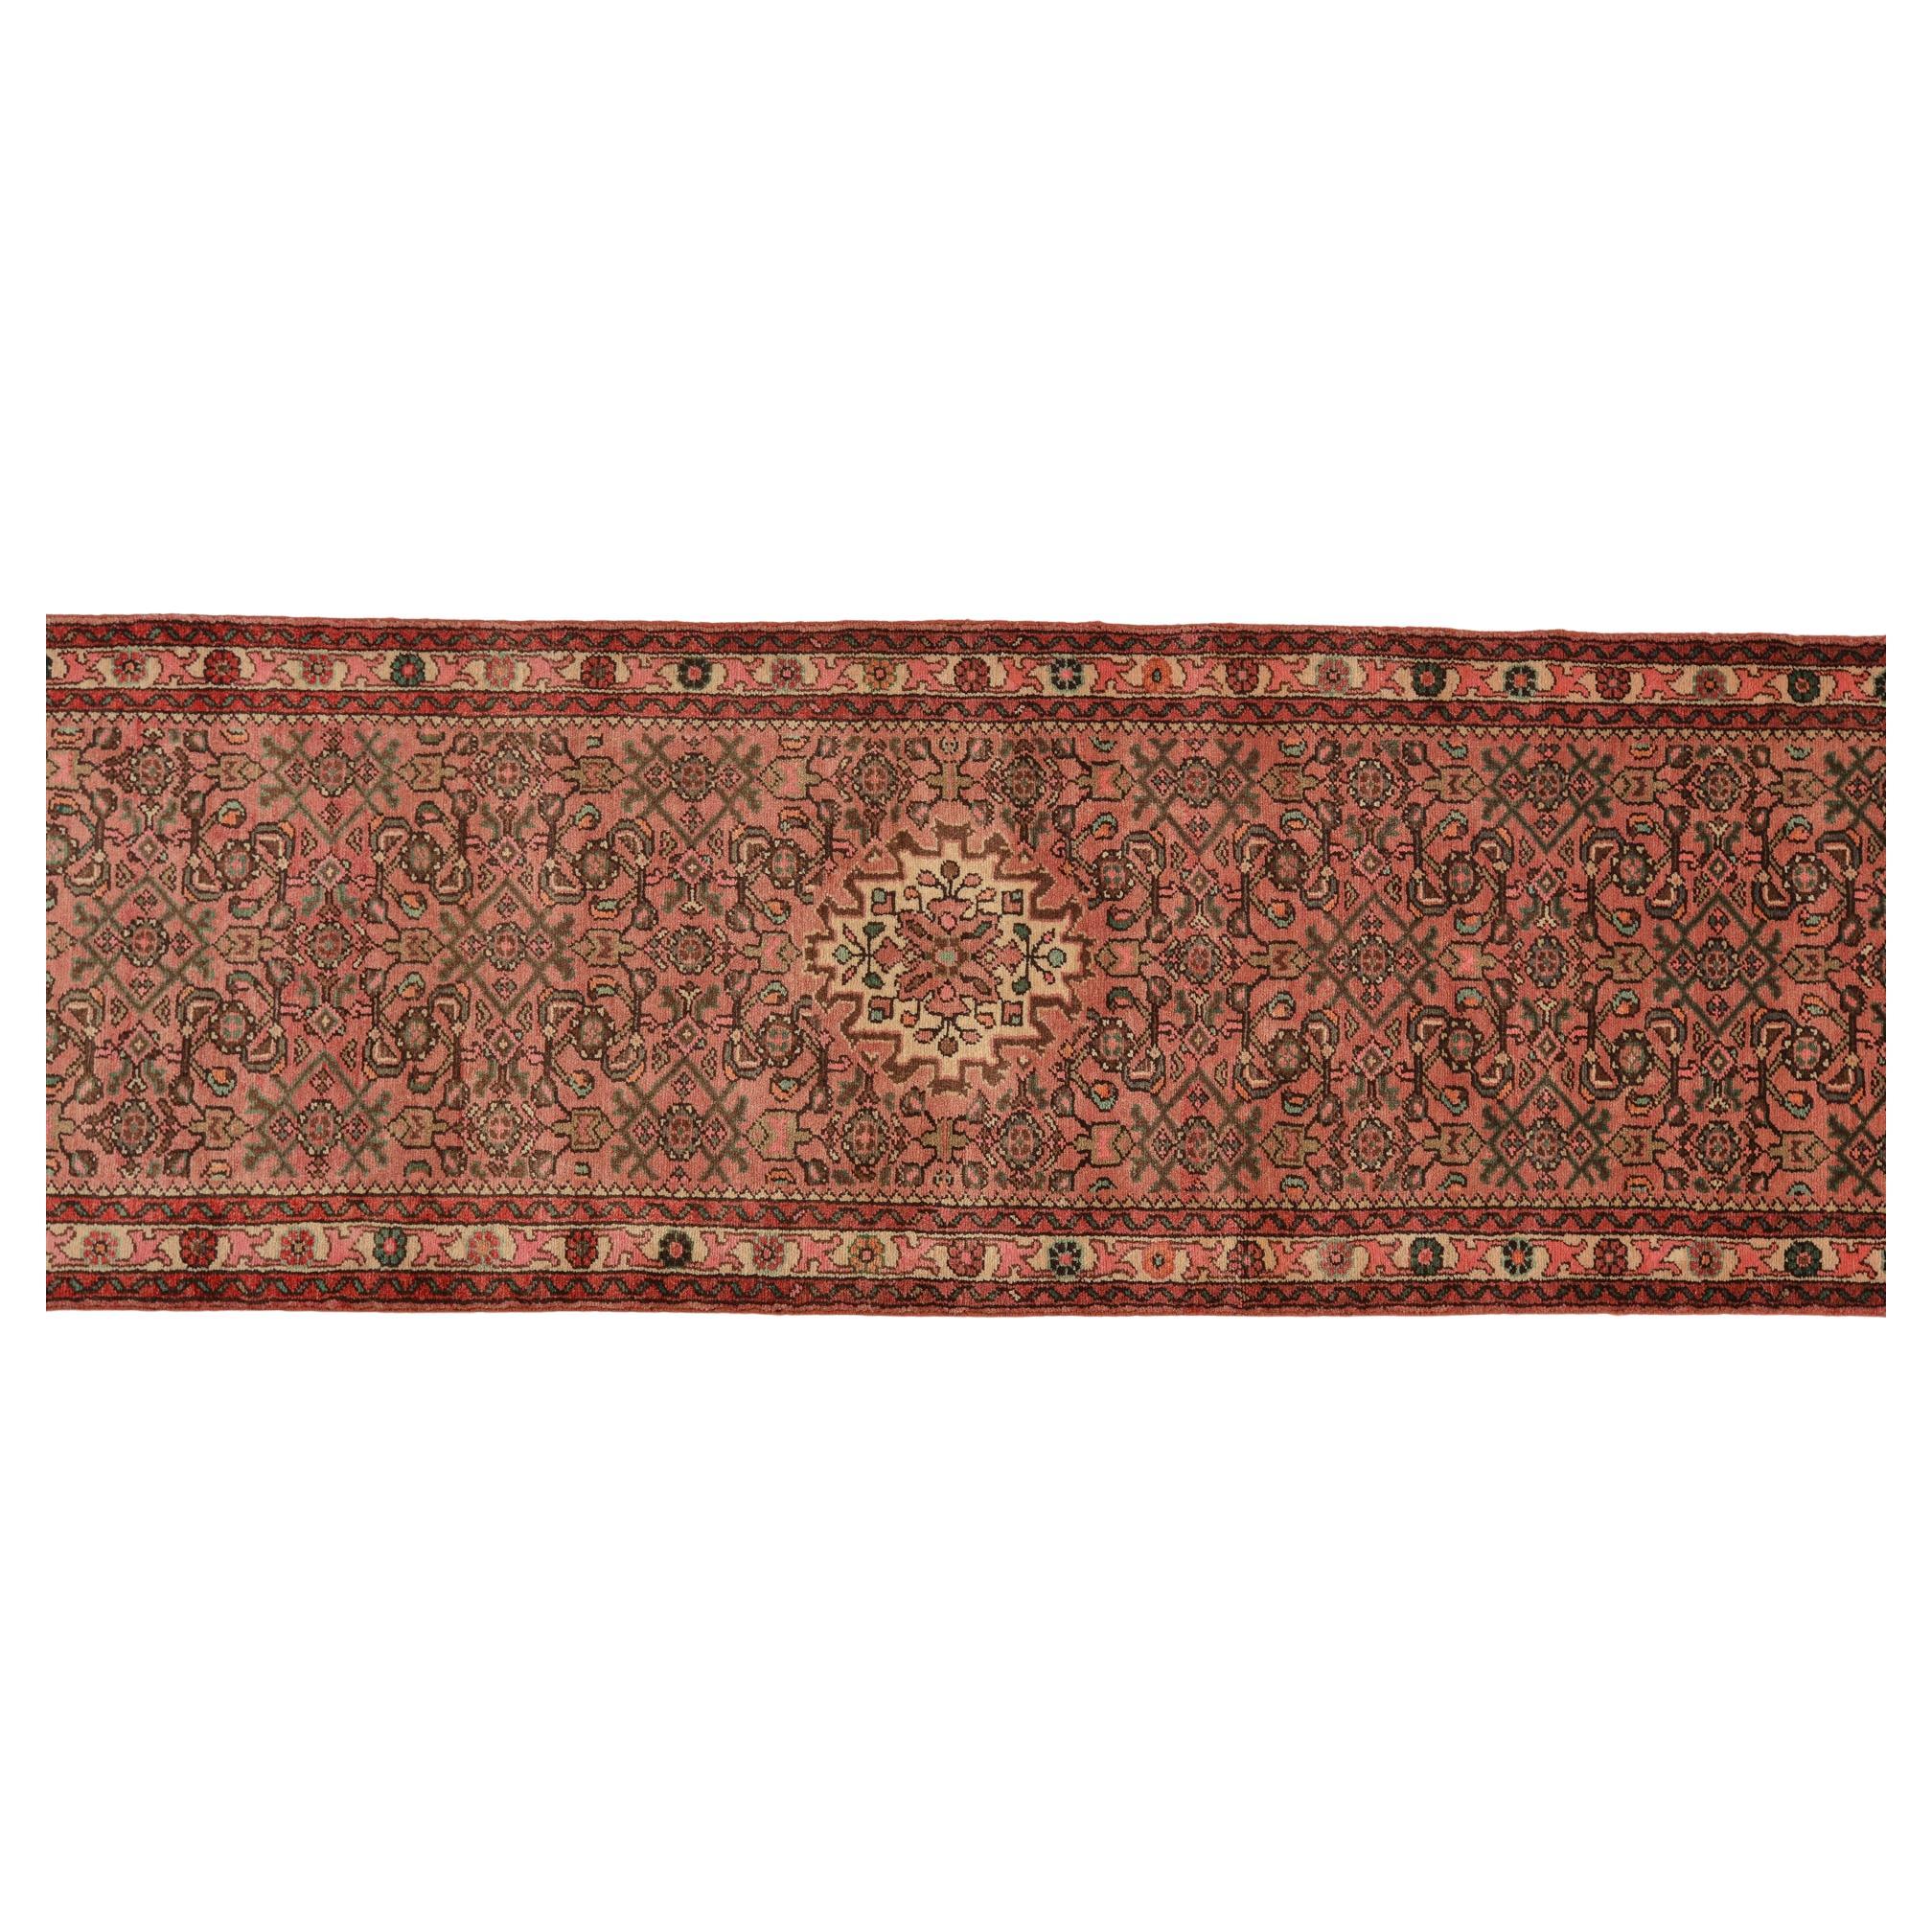 nr. 438 - Sturdy rug with geometric design in a soft pastel pink and ivory.
The minute geometric design covers the entire field. 
Good price for closing activities.